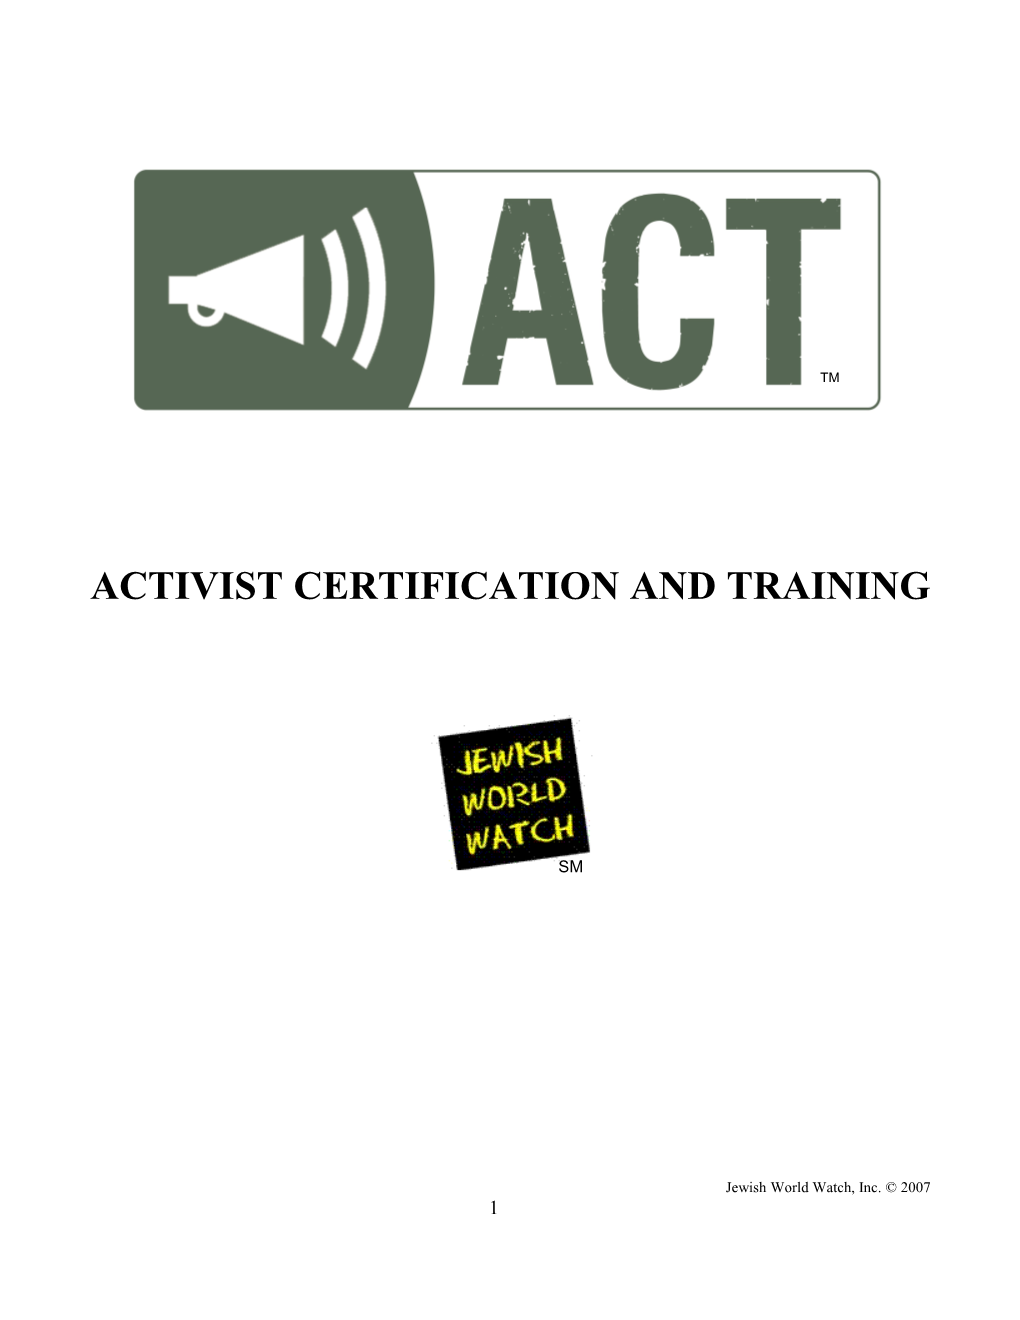 Activist Certification and Training